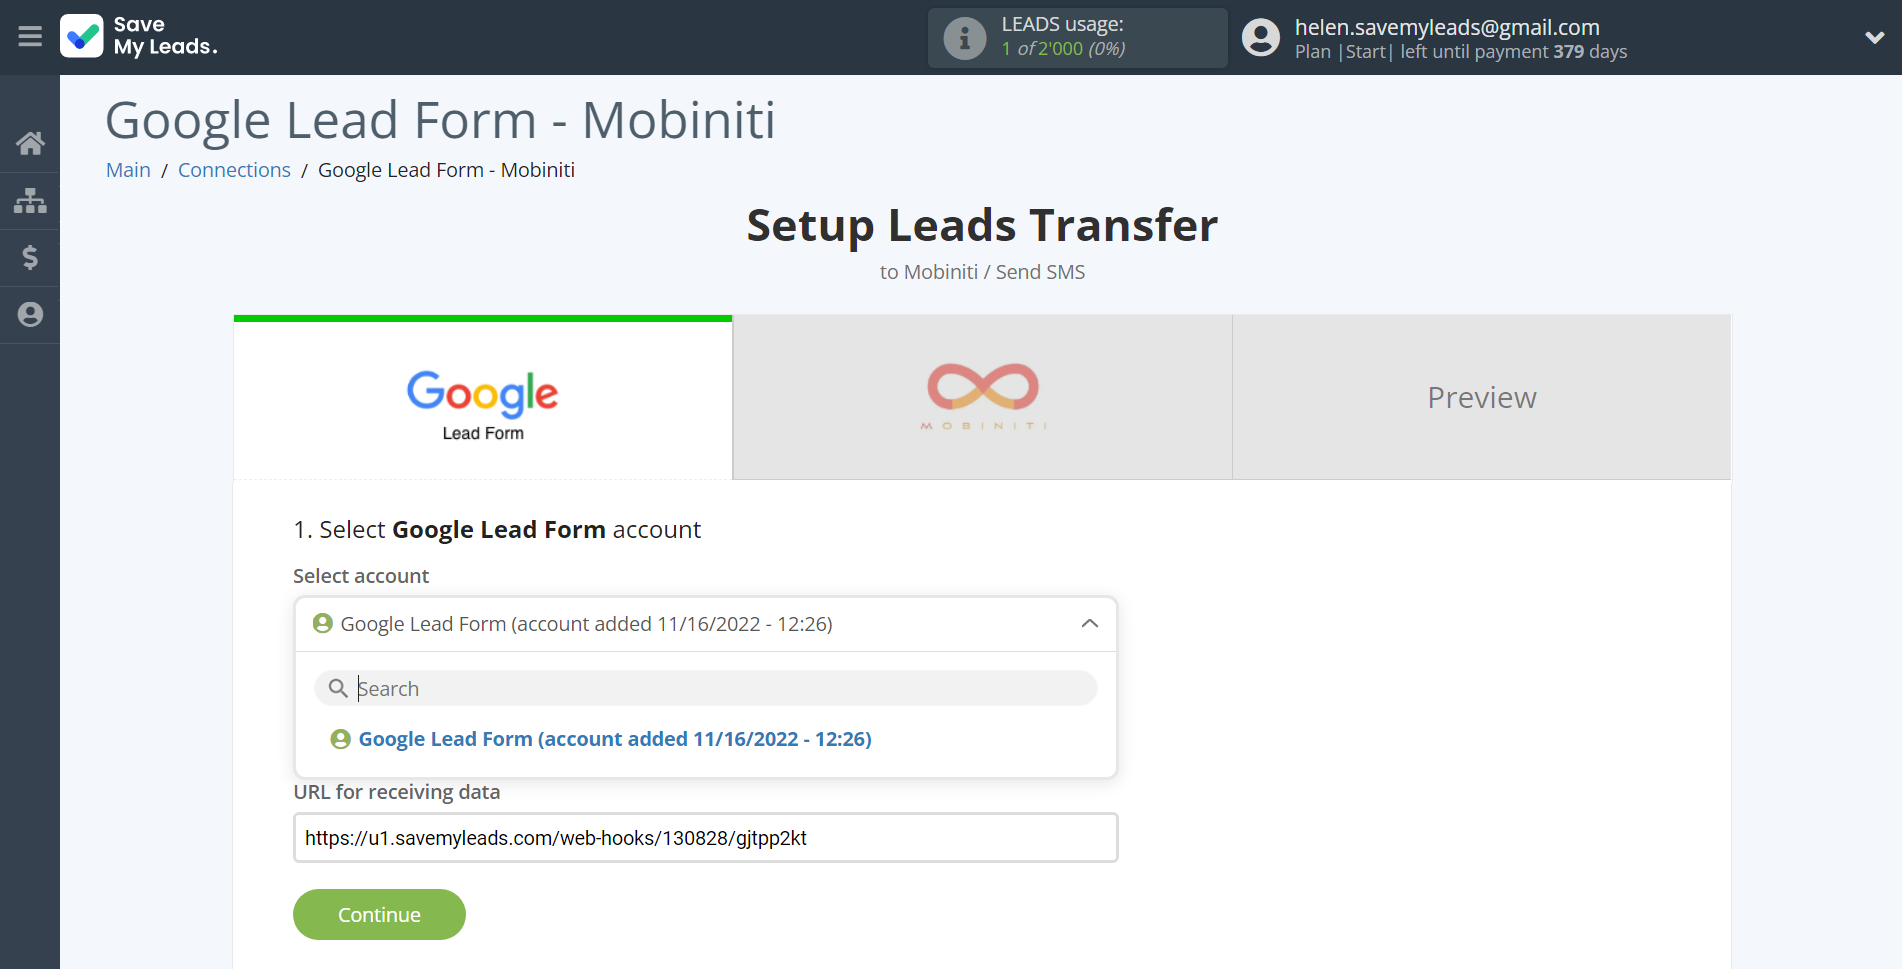 How to Connect Google Lead Form with Mobiniti | Data Source account selection